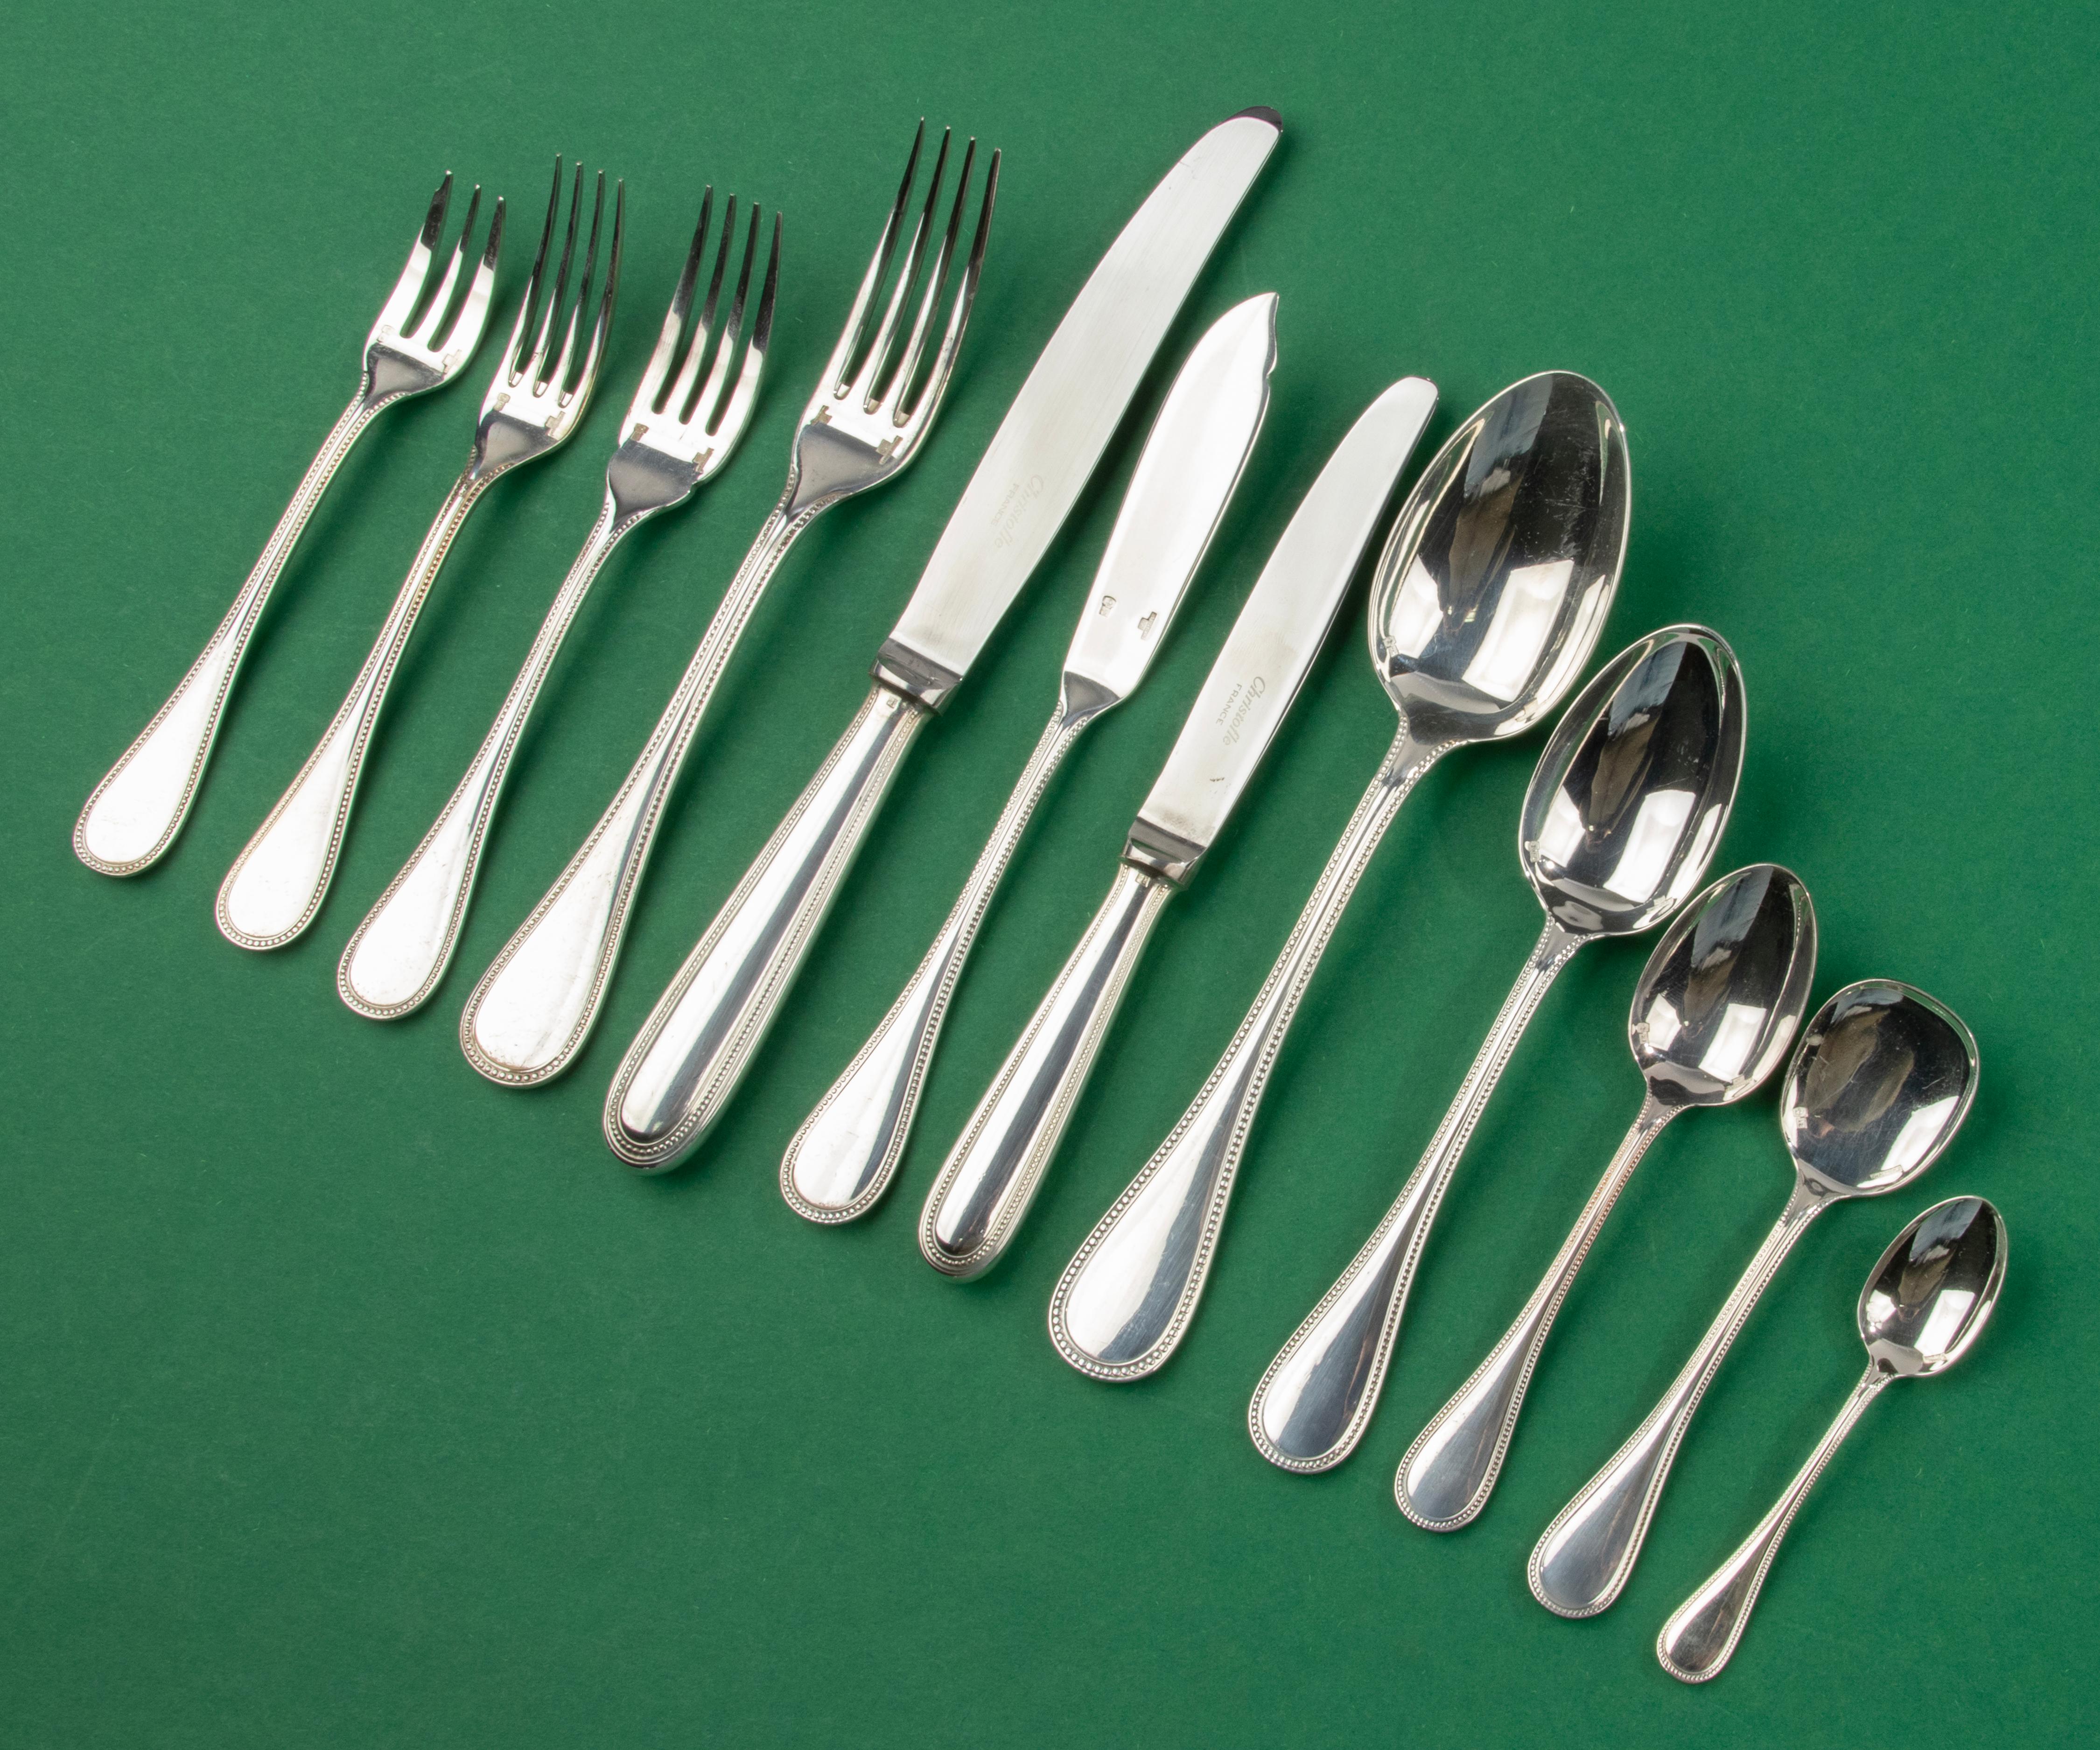 A great set silver plated tableware, complete for 12 persons, made by the French brand Christofle. 
The name of the model is Perles. A classic and timeless design that will fit in any table setting. 
The set is in very good condition, it looks like